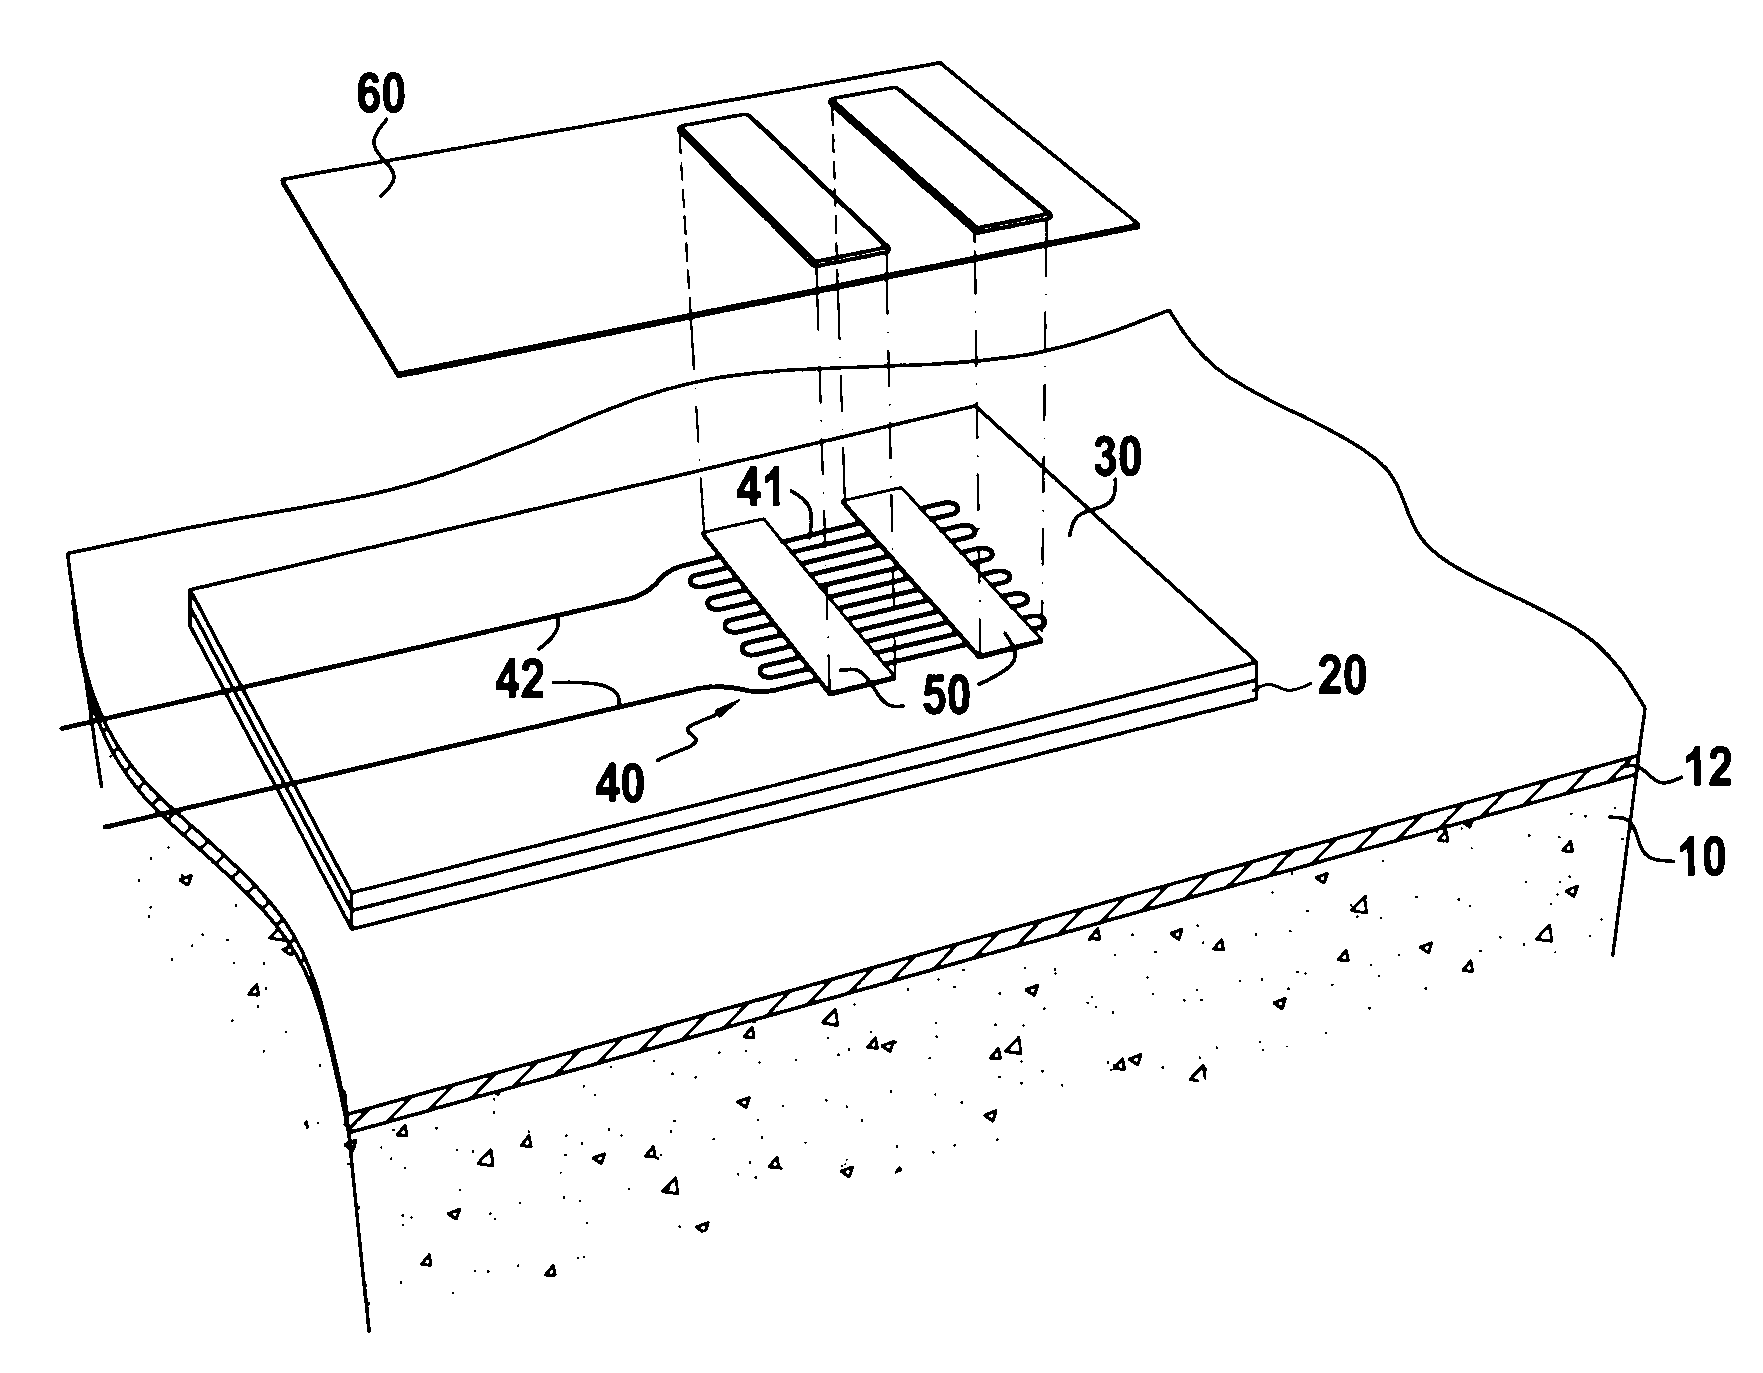 Method of making an alumina deposit on a substrate covered in sic